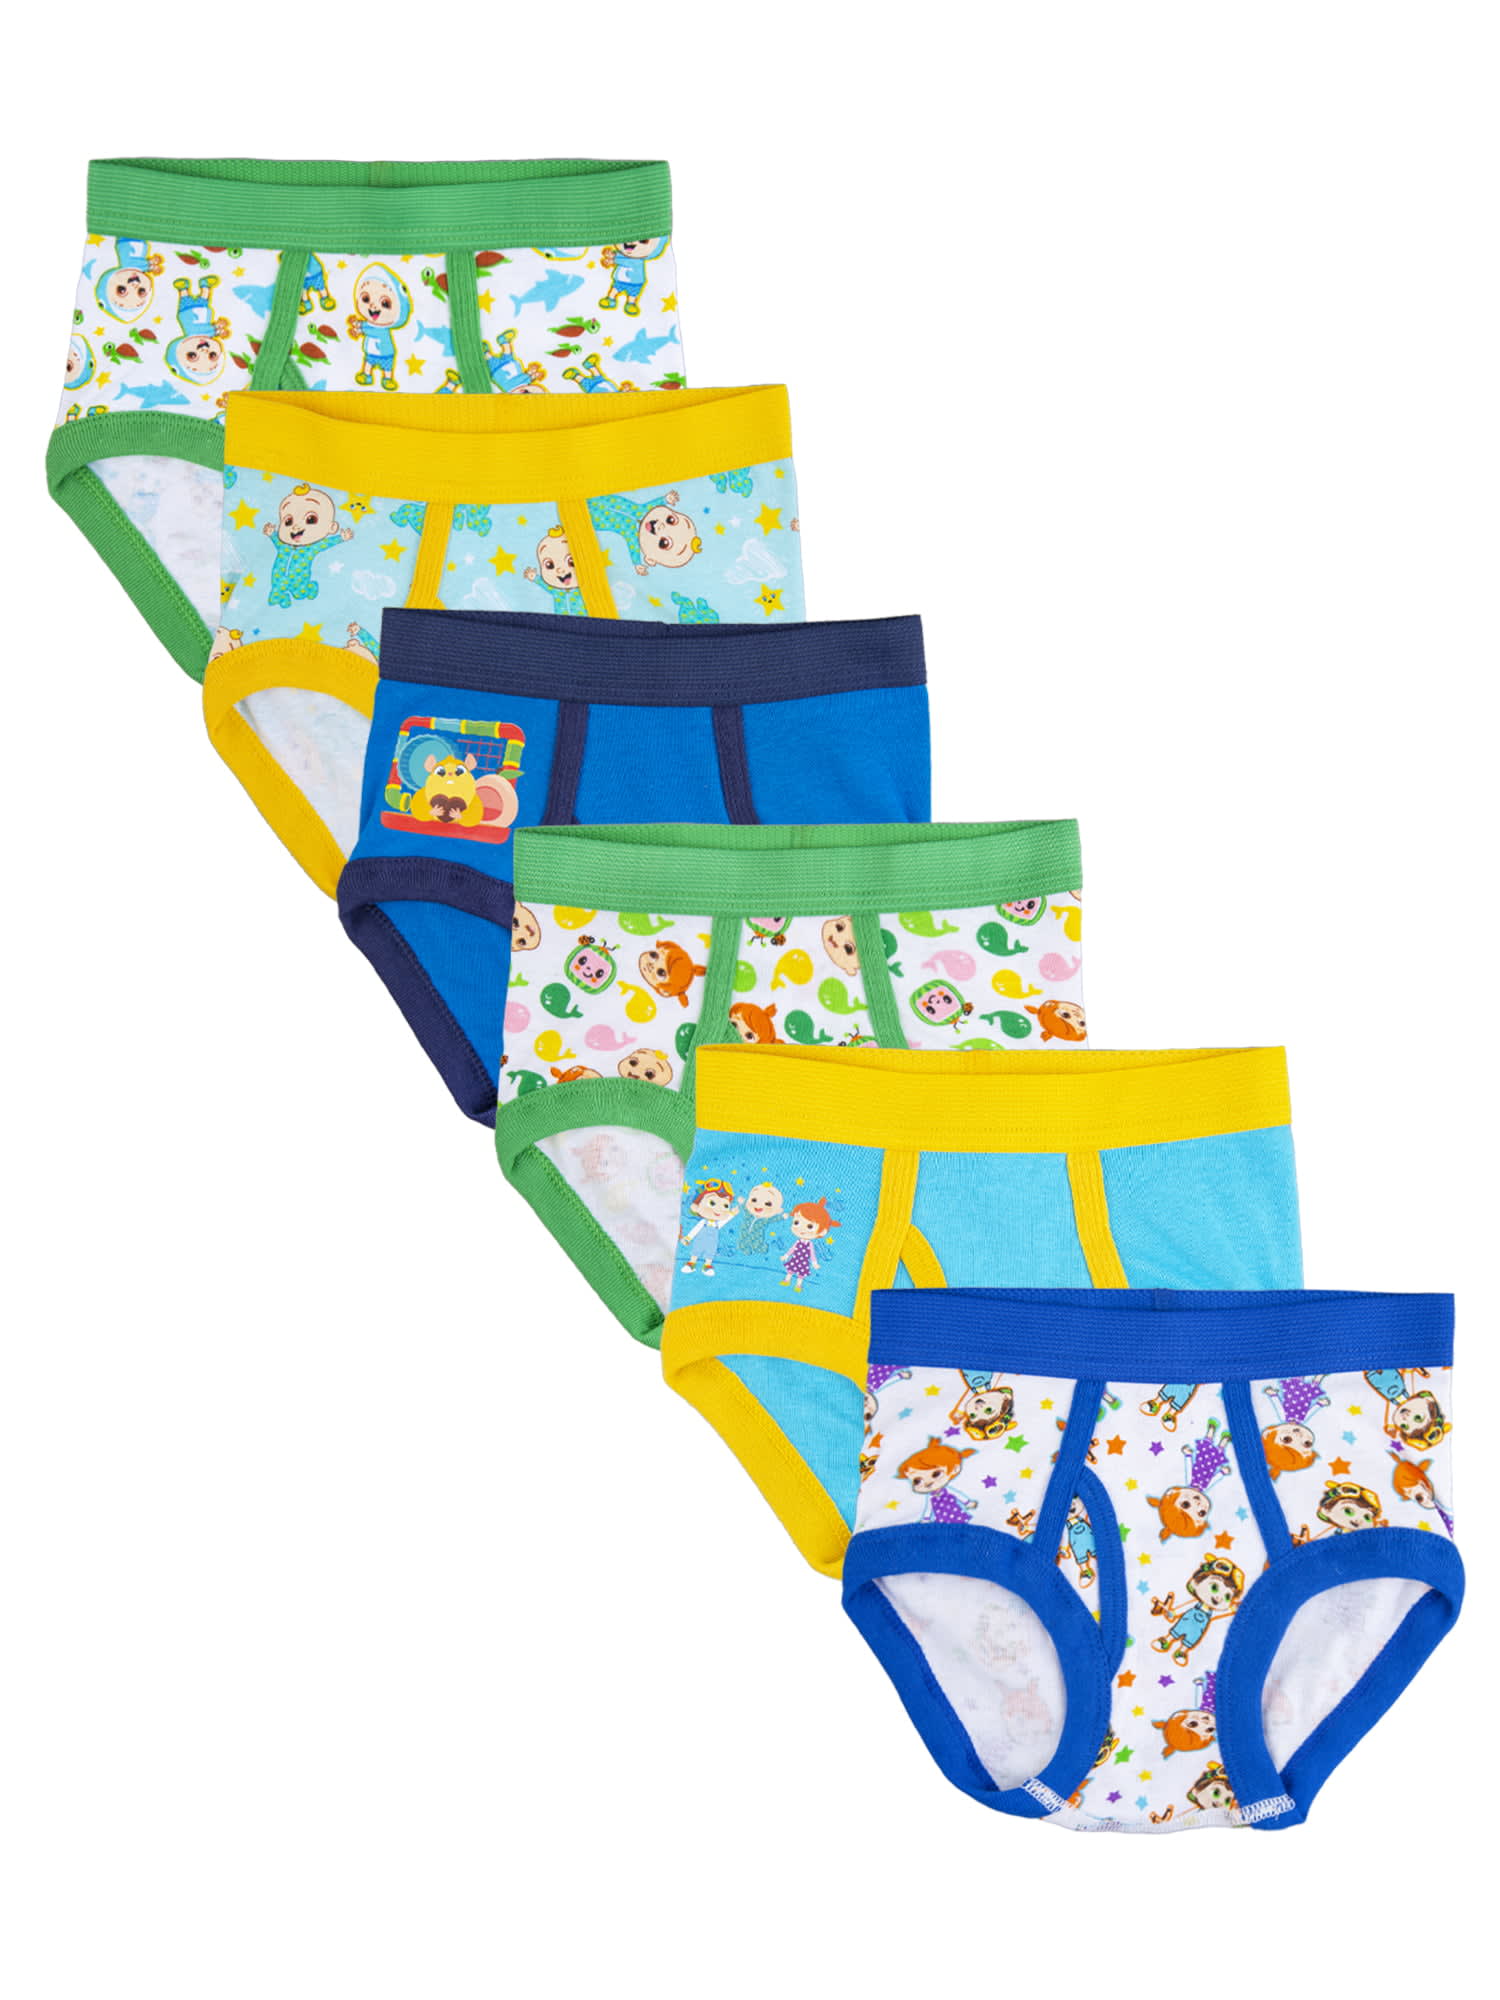 Paw Patrol Toddler Boys Briefs, 6 Pack Sizes 2T-4T 